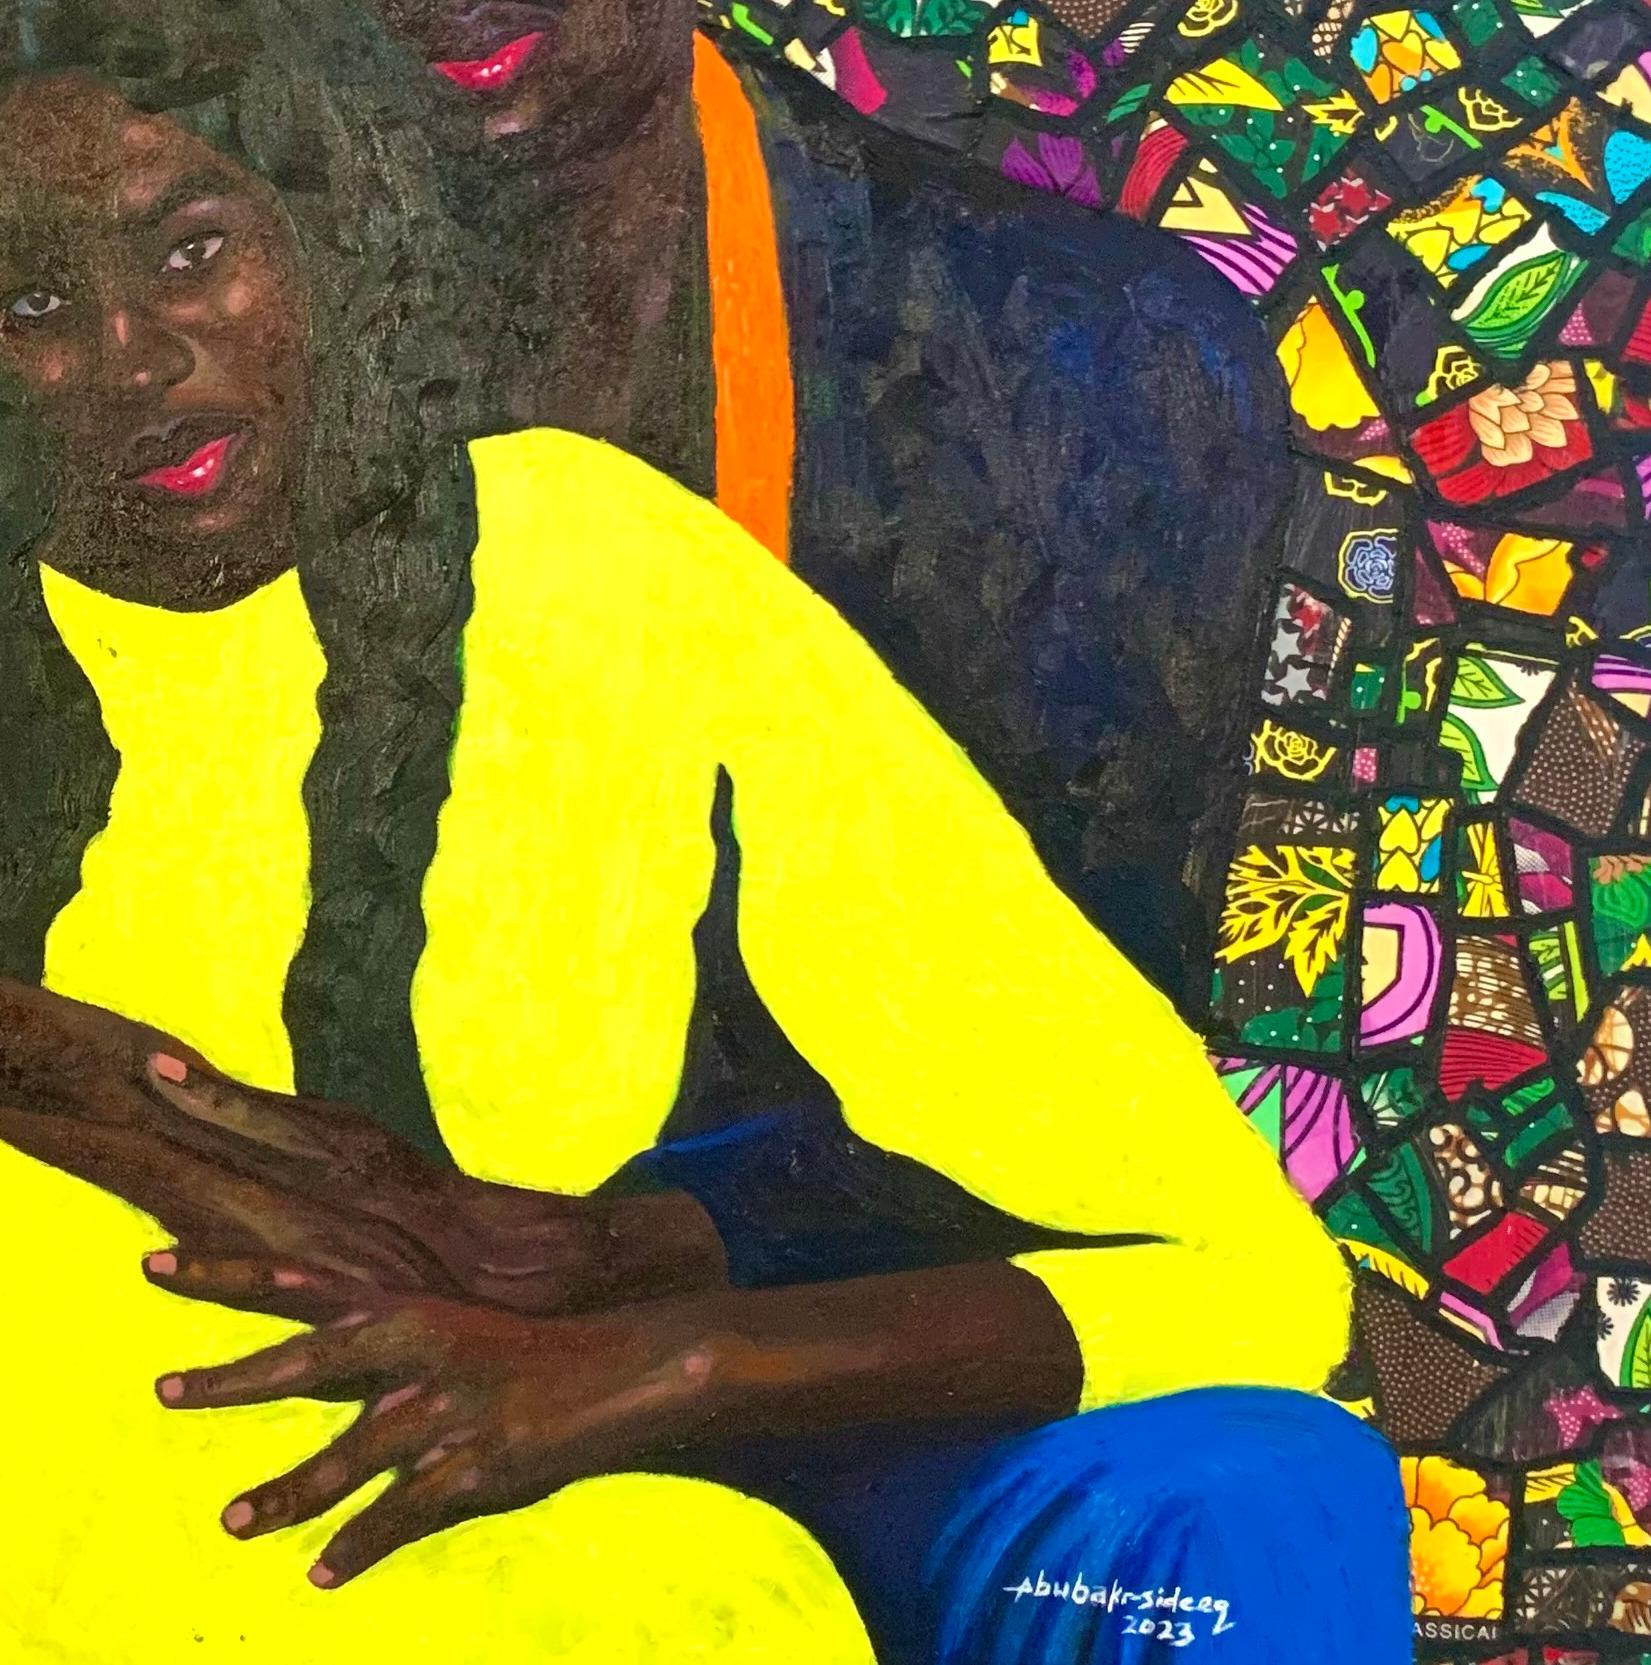 Shades of Love was created by Tunde Bakare. Tunde created the painting with Oil, Fabric, and Collage on a primed canvas of 44W by 48H.

Shades of Love depicts the type of love that exists in the 21st century. Love is a peculiar thing, as many say,